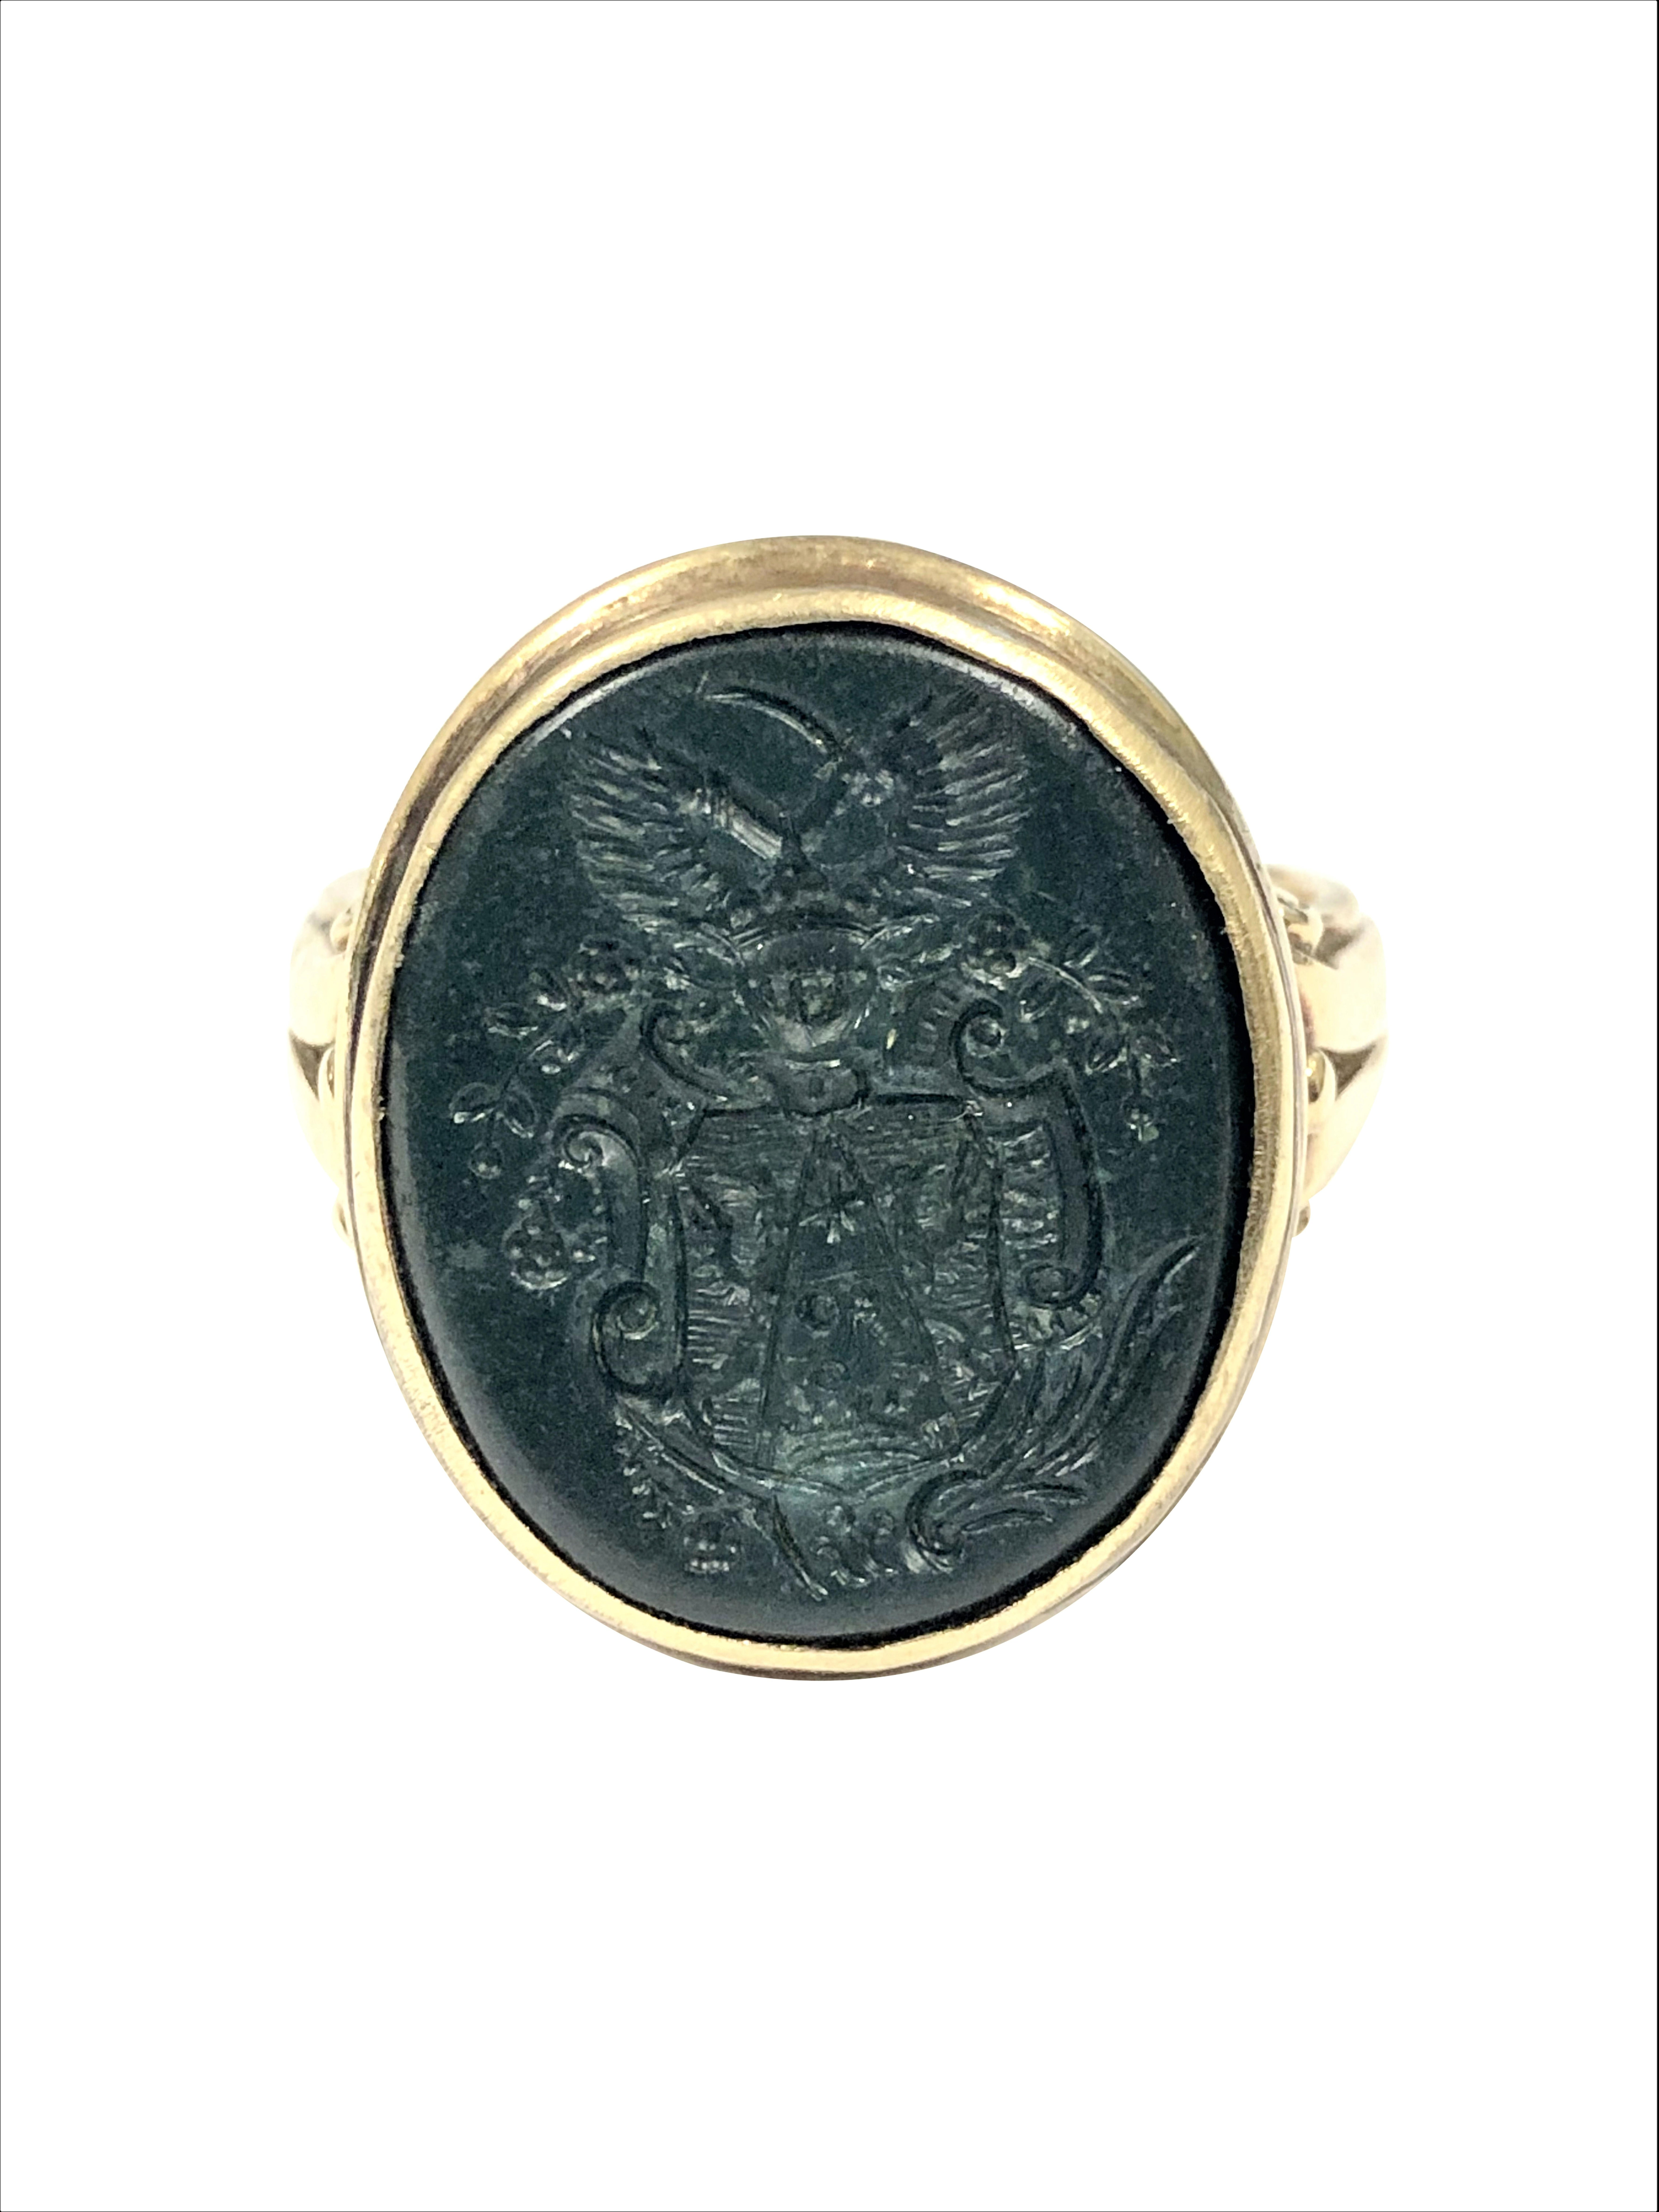 Circa 1880s 14K Yellow Gold Signet Ring, 3/16 inch wide shank with the top of the ring measuring 7/8 X 5/8 inch and set with a Blood Stone that is deeply carved with a Family Crest, Finger size 11. The inside of the shank has European Stamps.